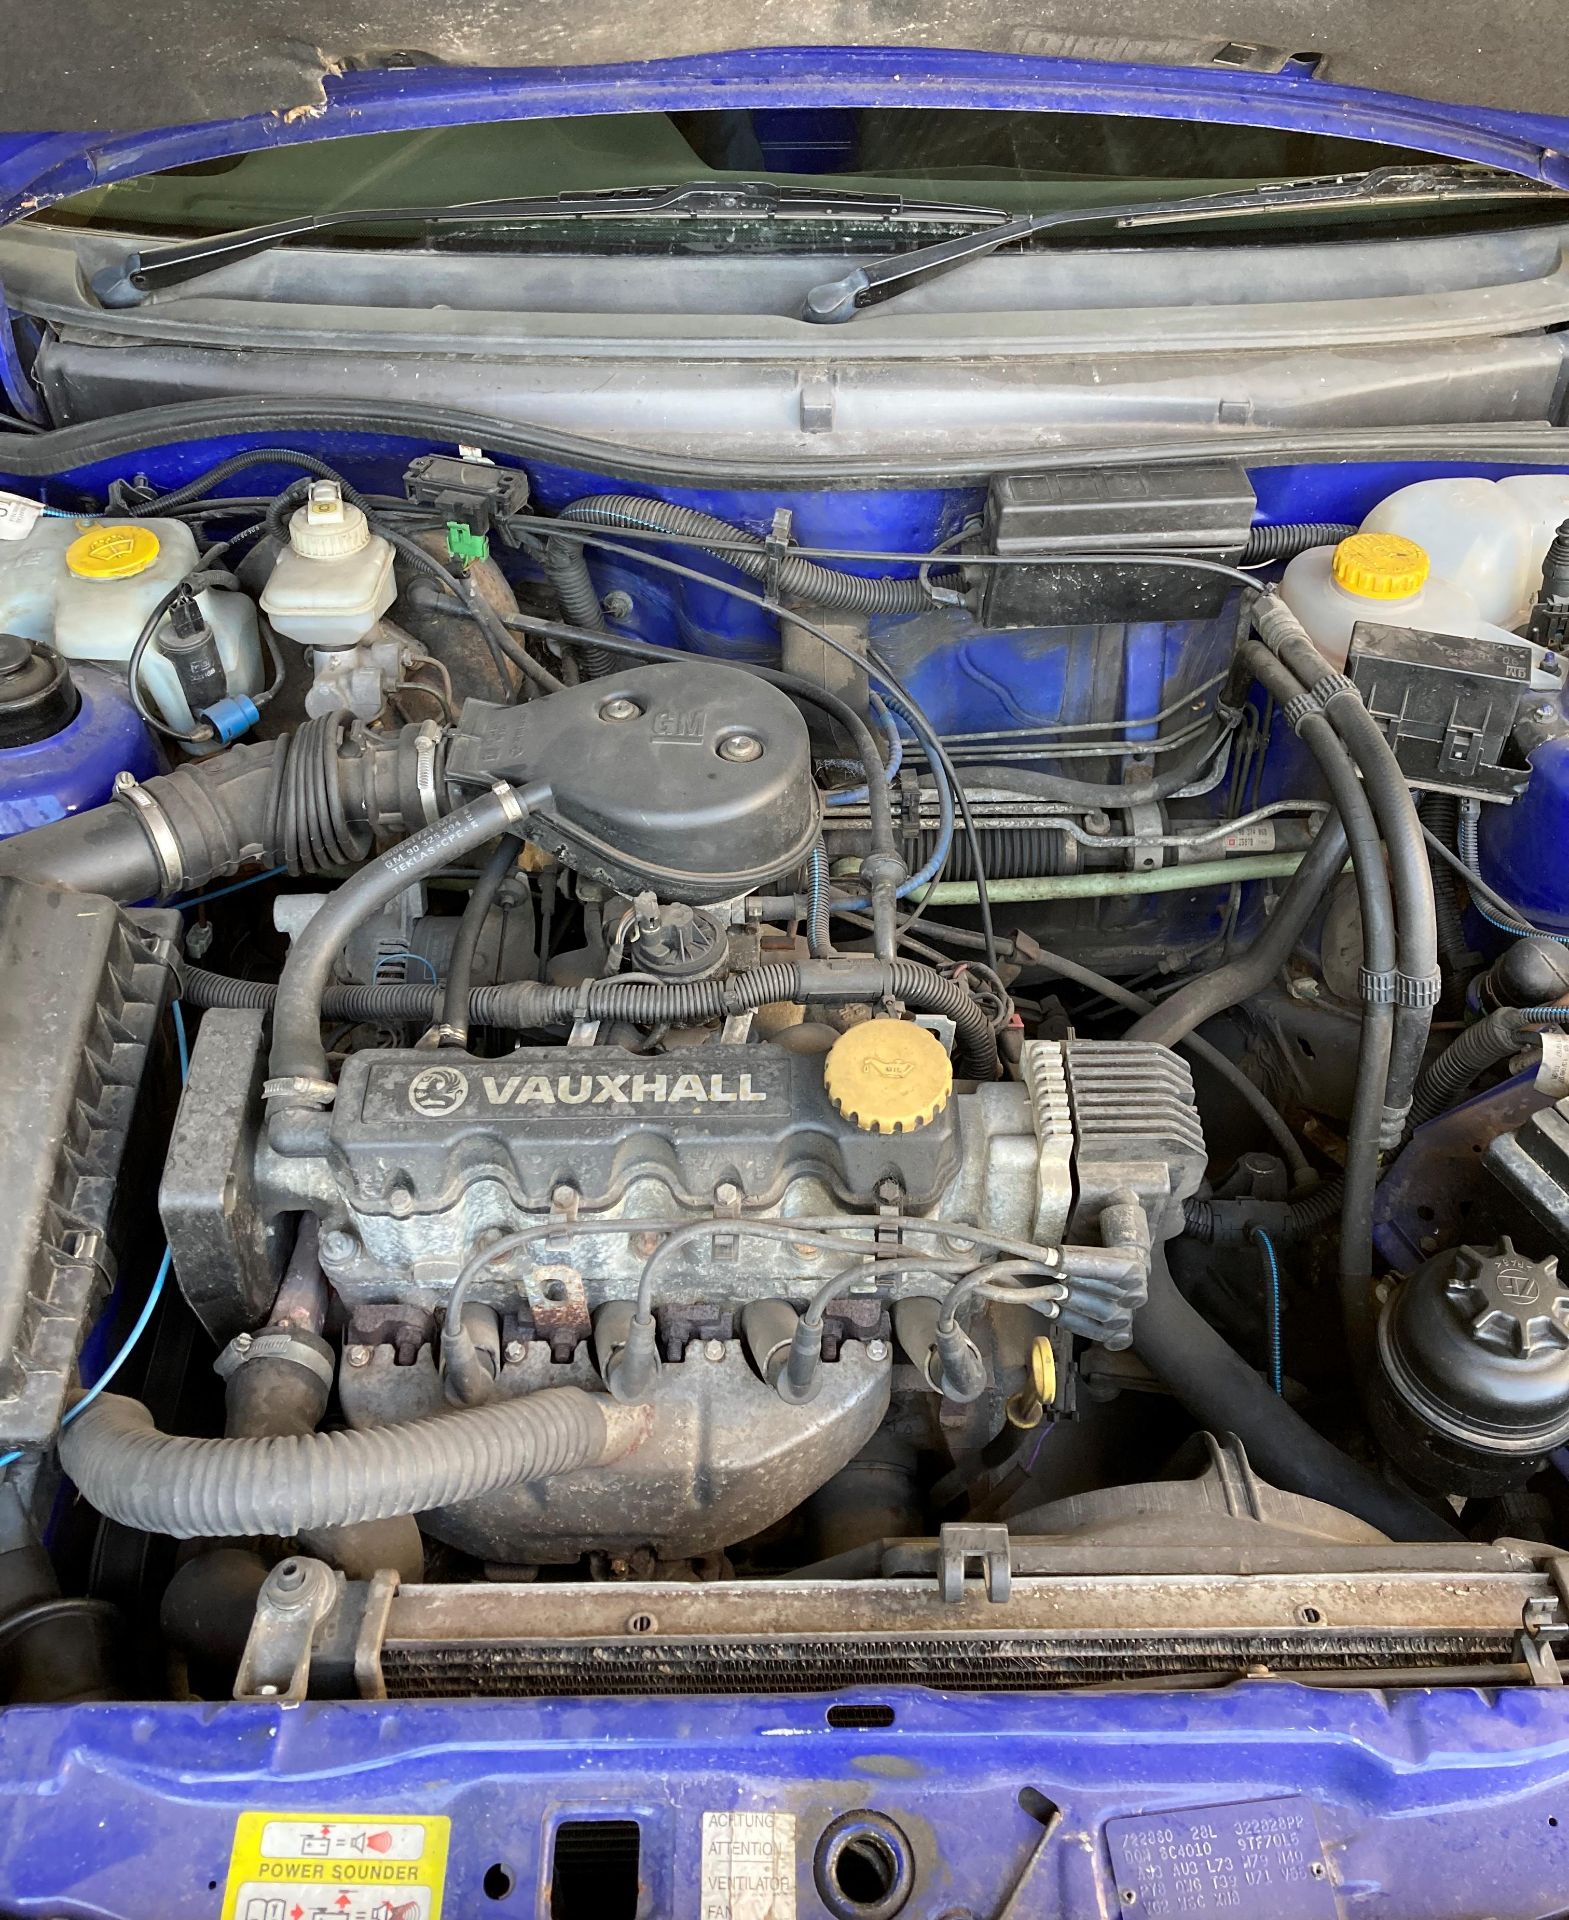 VAUXHALL LS 1.6 ASTRAVAN - Petrol - Blue. On the instructions of: A client closing his business. - Image 10 of 10